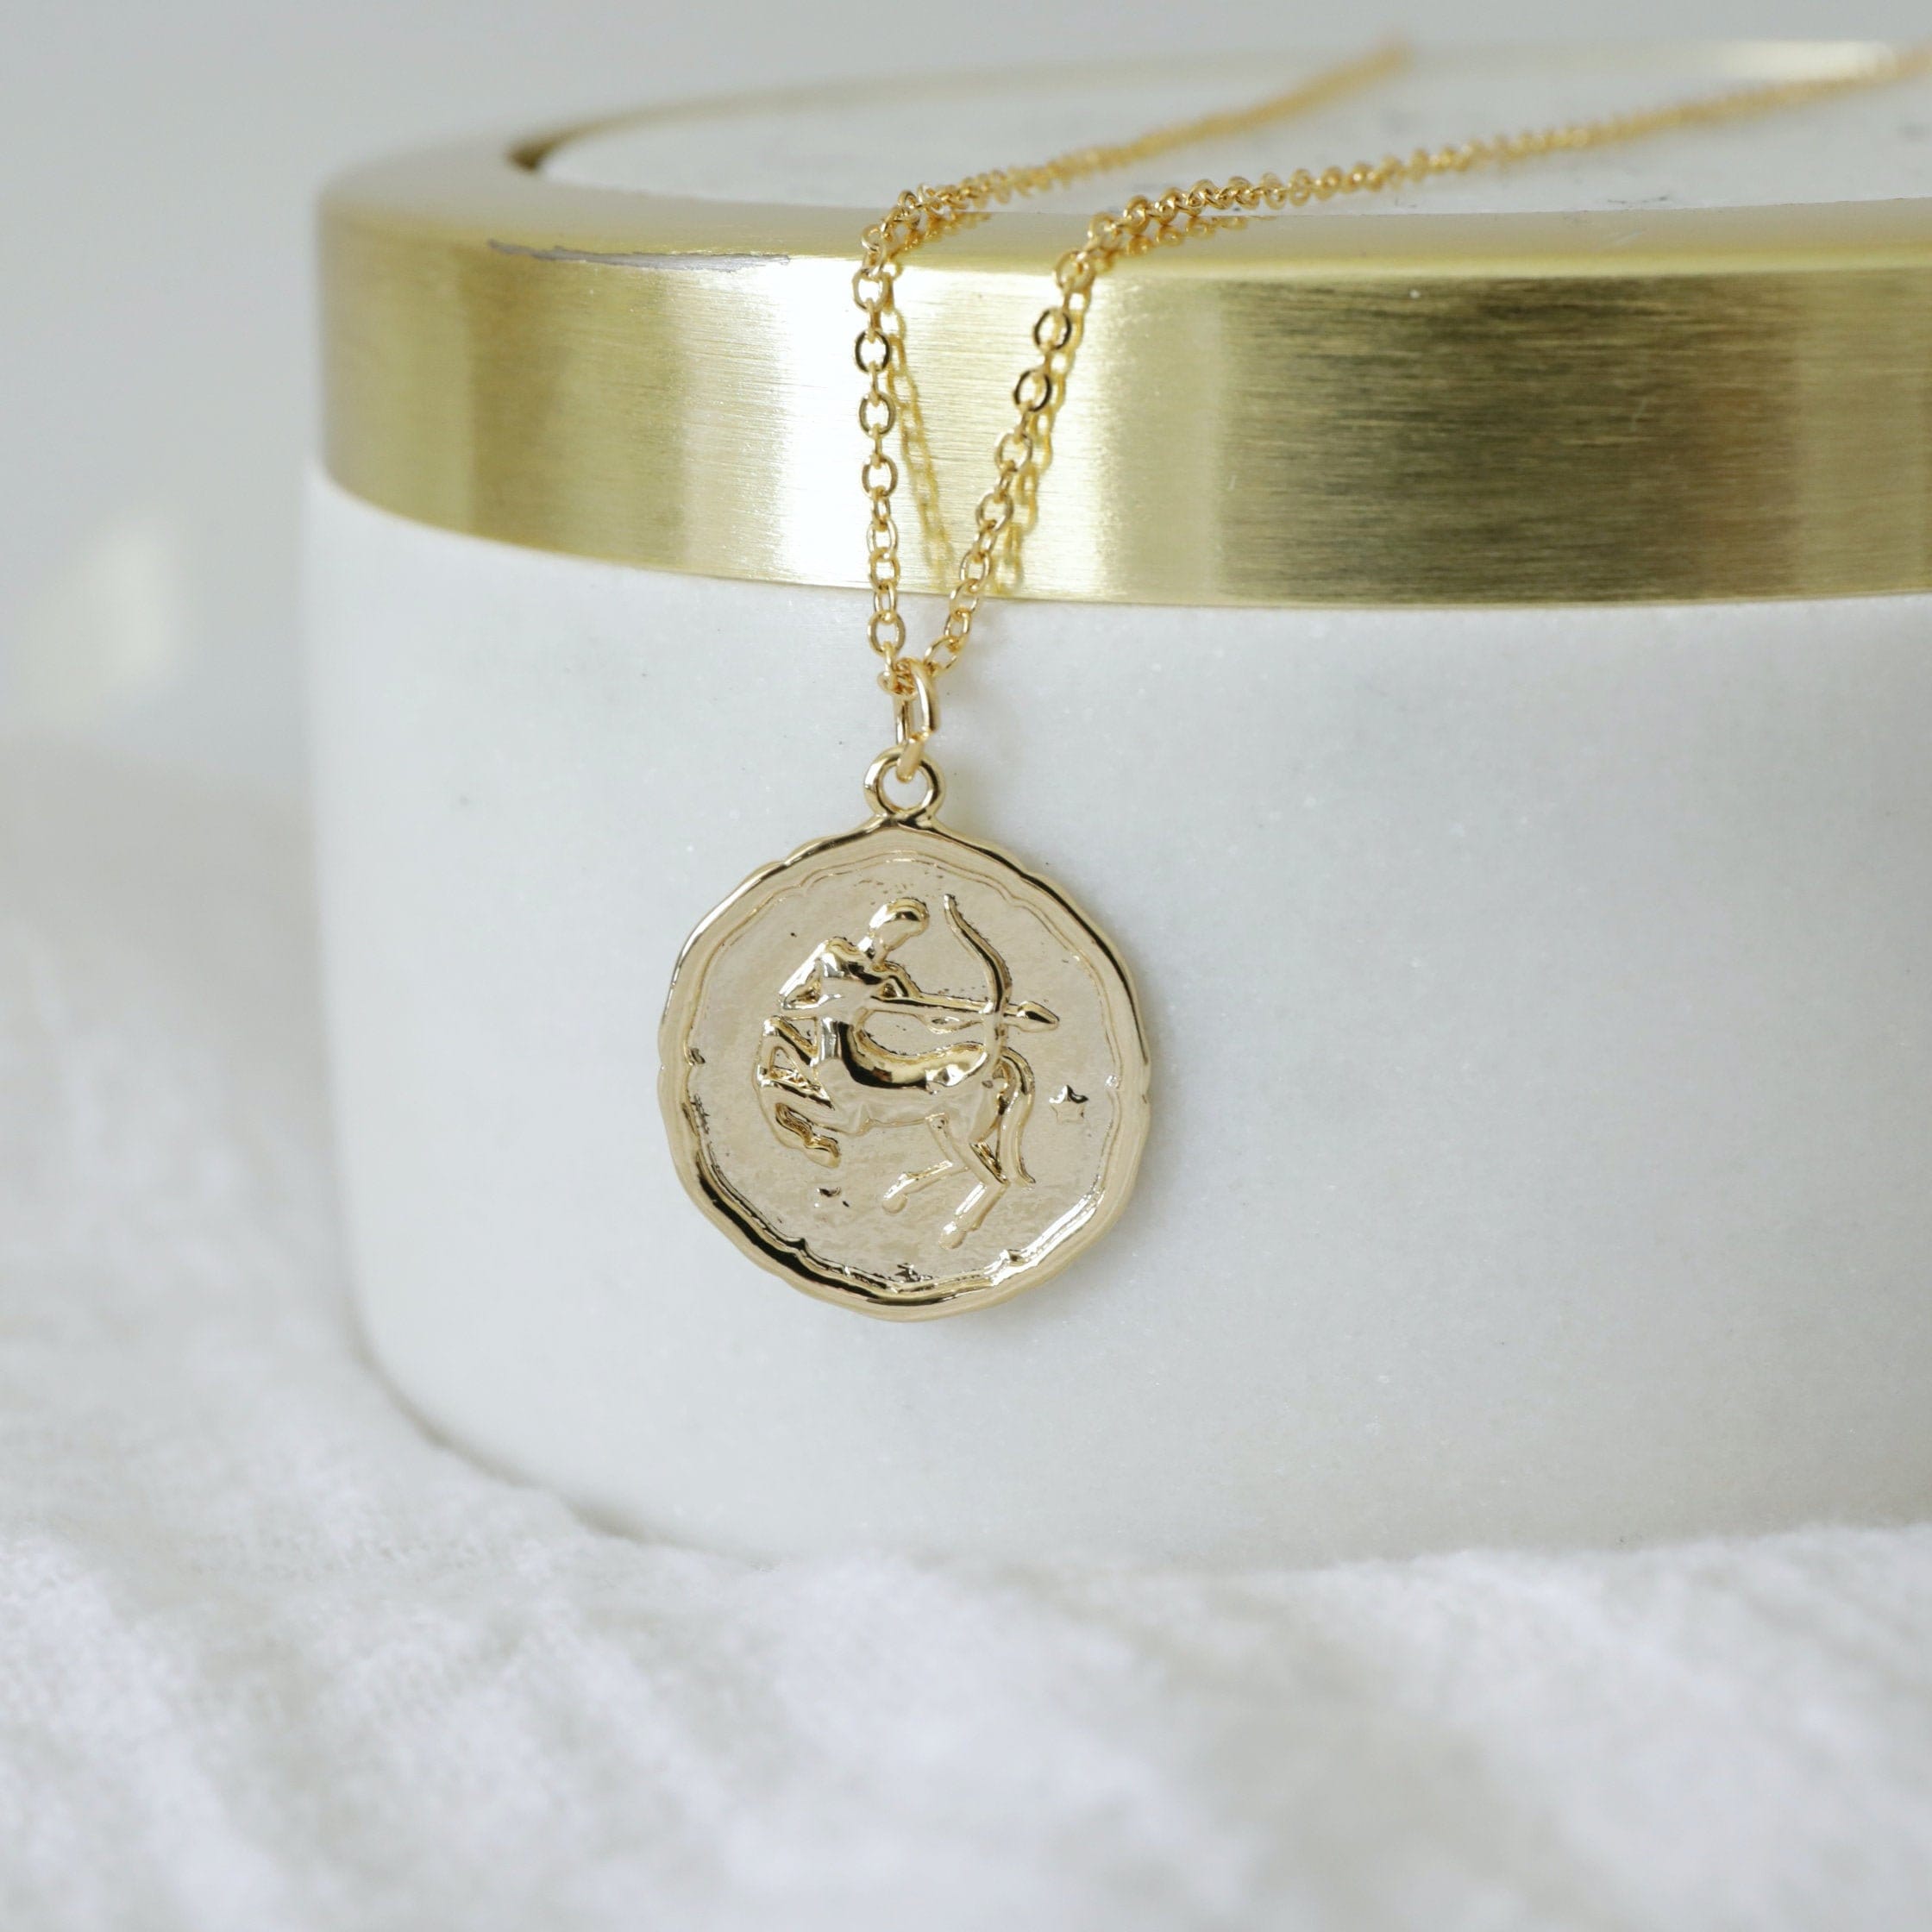 Sagittarius Sign Coin Necklace, Zodiac Jewelry, Celestial Jewelry, Constellation Necklace , December Birthday Gift, Bridesmaid Gift